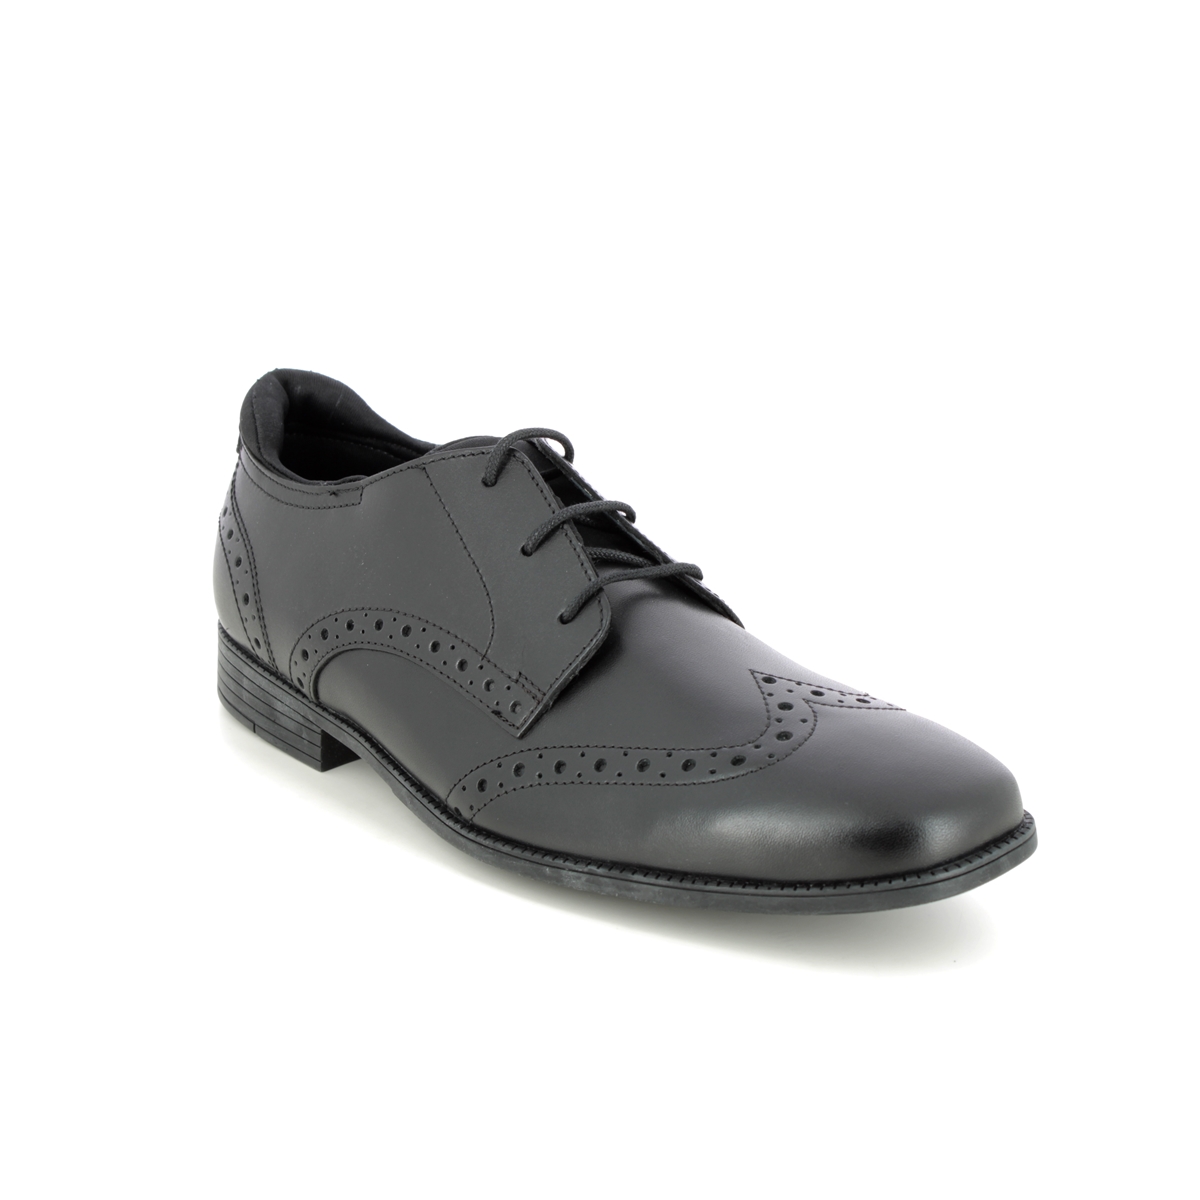 Start Rite - Tailor In Black Leather 2792-76F In Size 5.5 In Plain Black Leather For School Boys Shoes  In Black Leather For kids